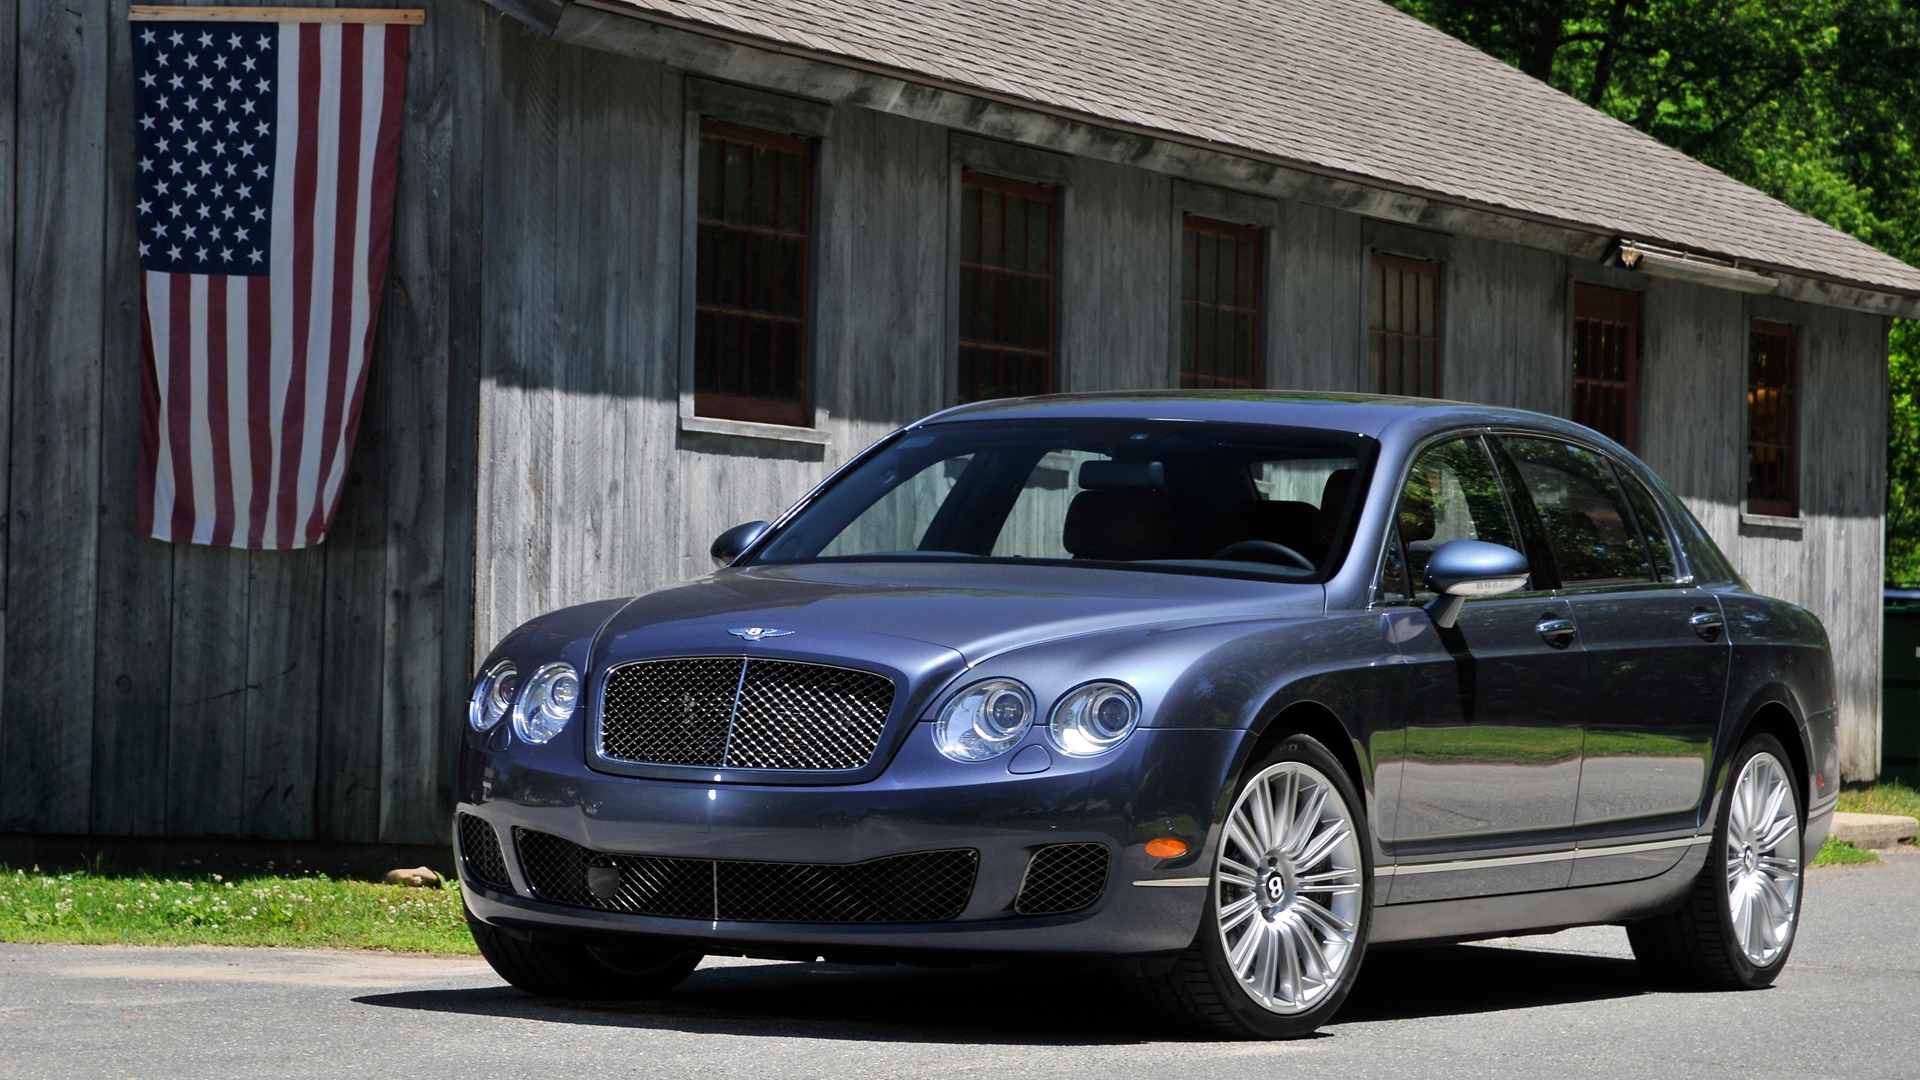 Bentley Continental Flying Spur Speed - 2008 賓利 #5 - 1920x1080